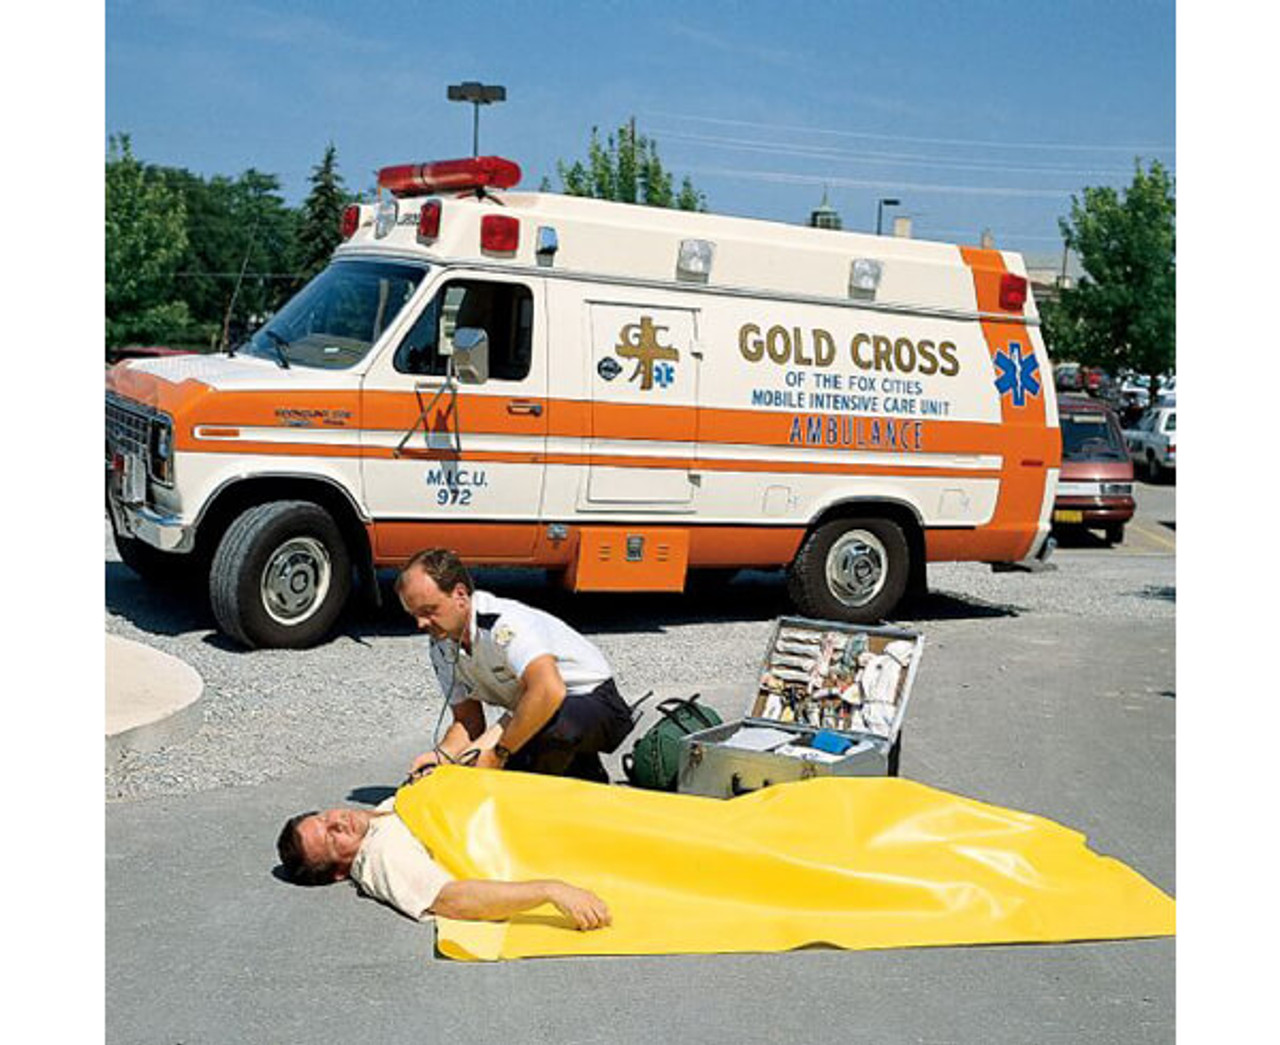 Emergency Disposable Insulated Blanket 58 x 90 - Yellow - Dixie EMS